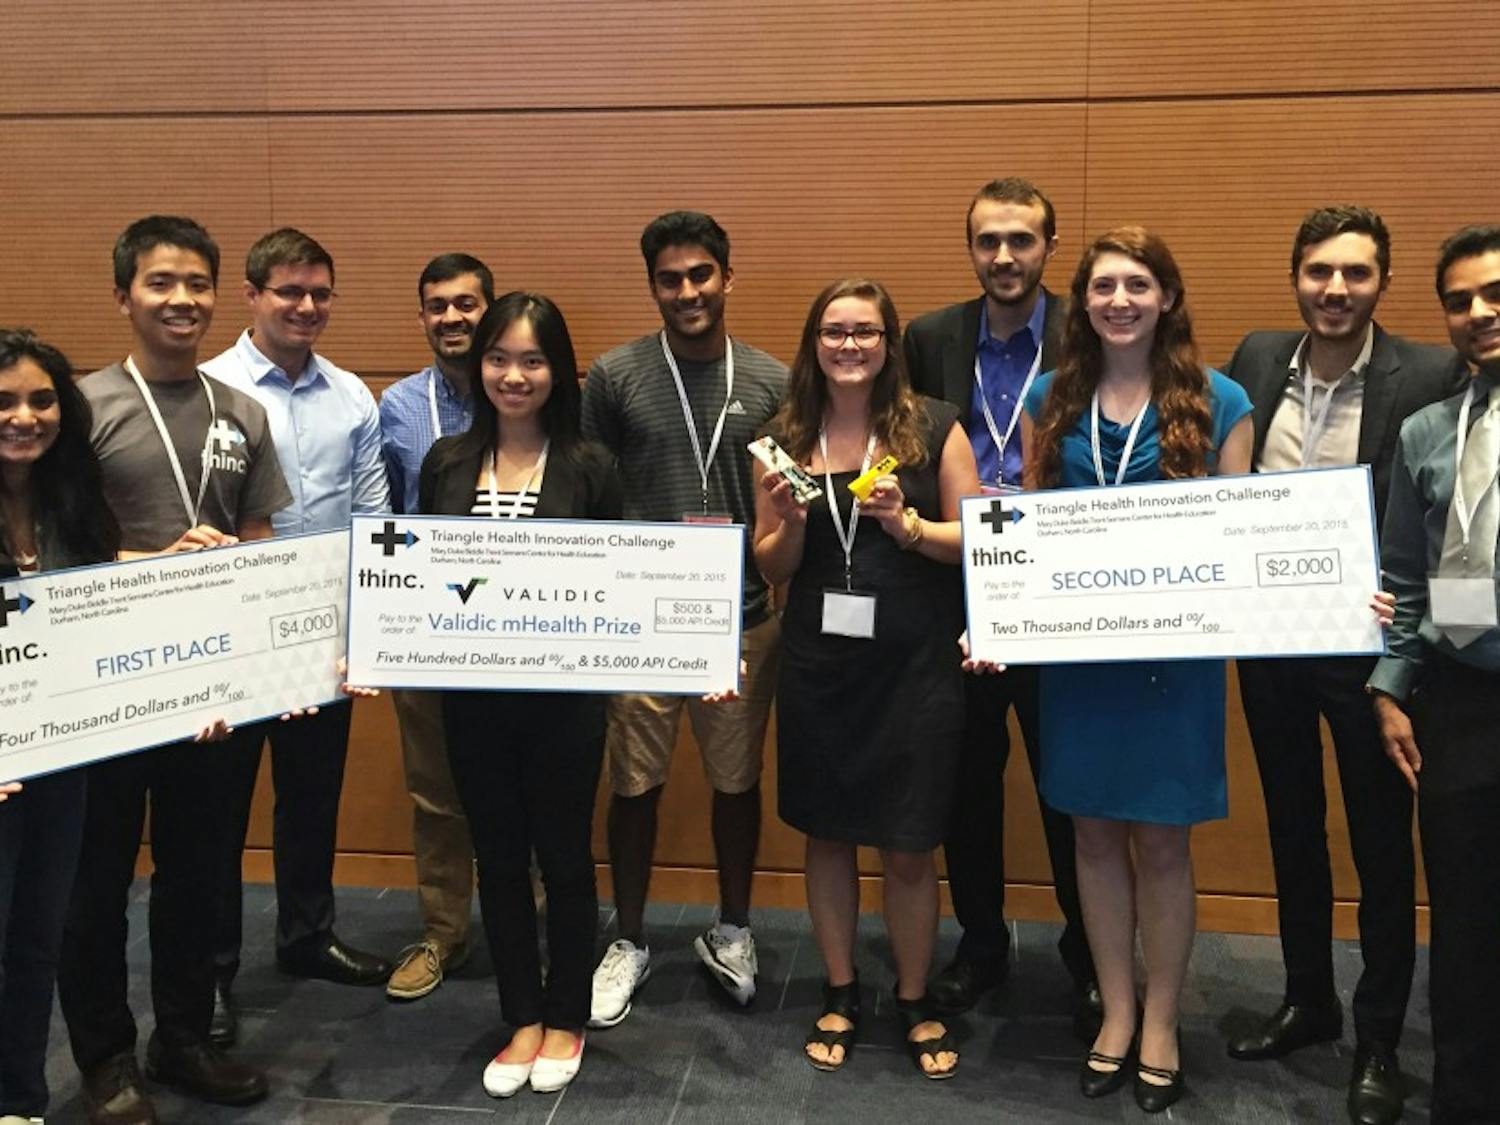 Teams of students proposed solutions to global medical issues and competed for a $4,000 grand prize in the first Triangle Health Innovation Challenge.